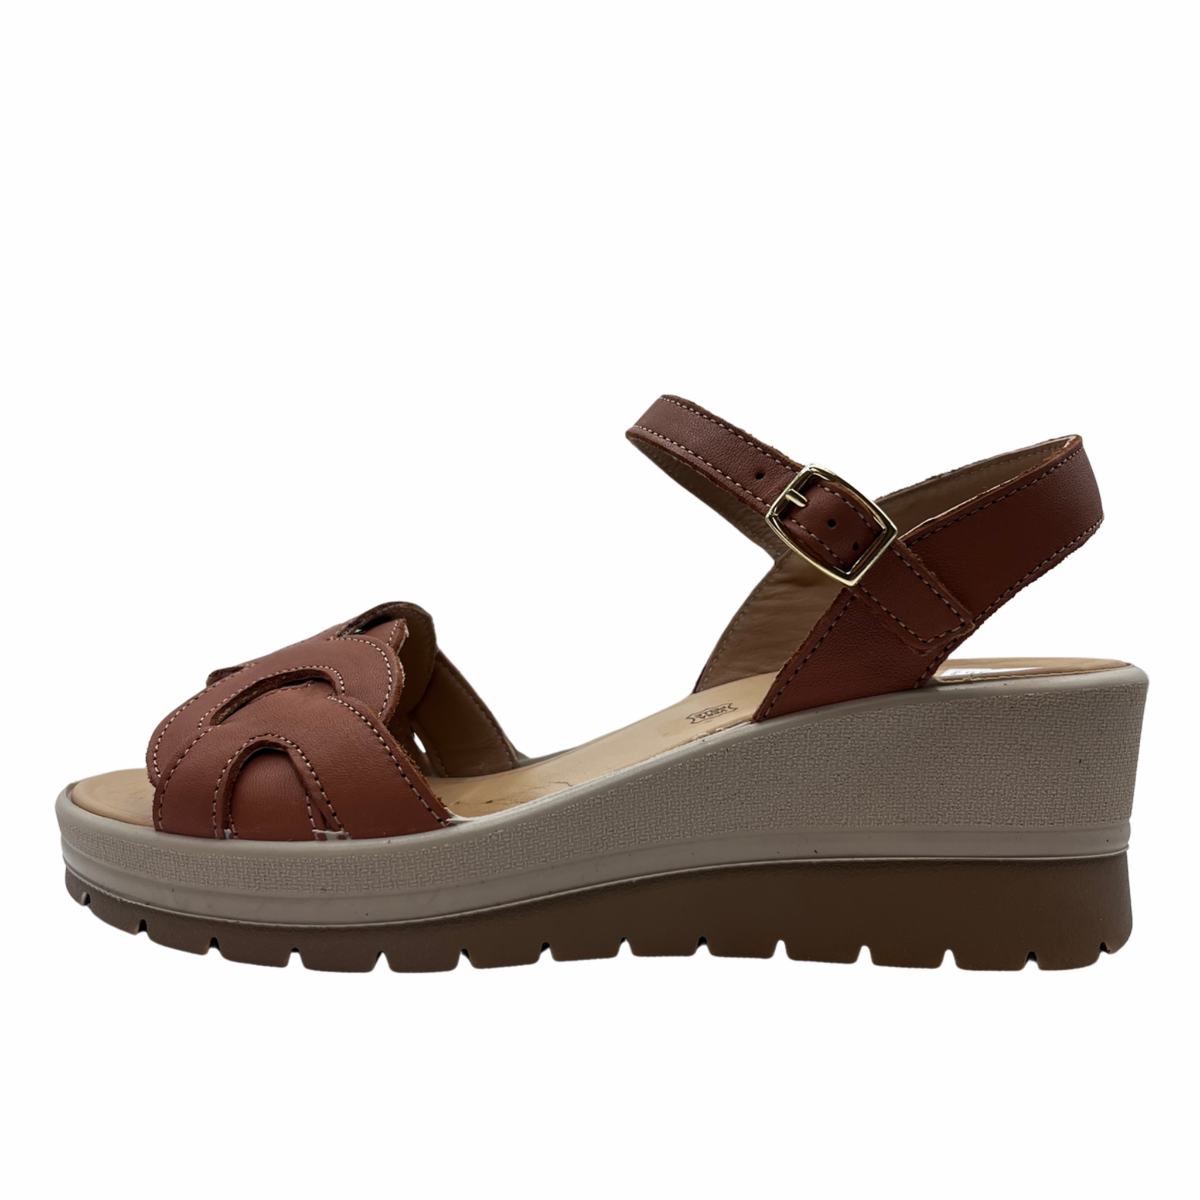 Igi &amp; Co Brown and Tan Leather Wedge Sandal